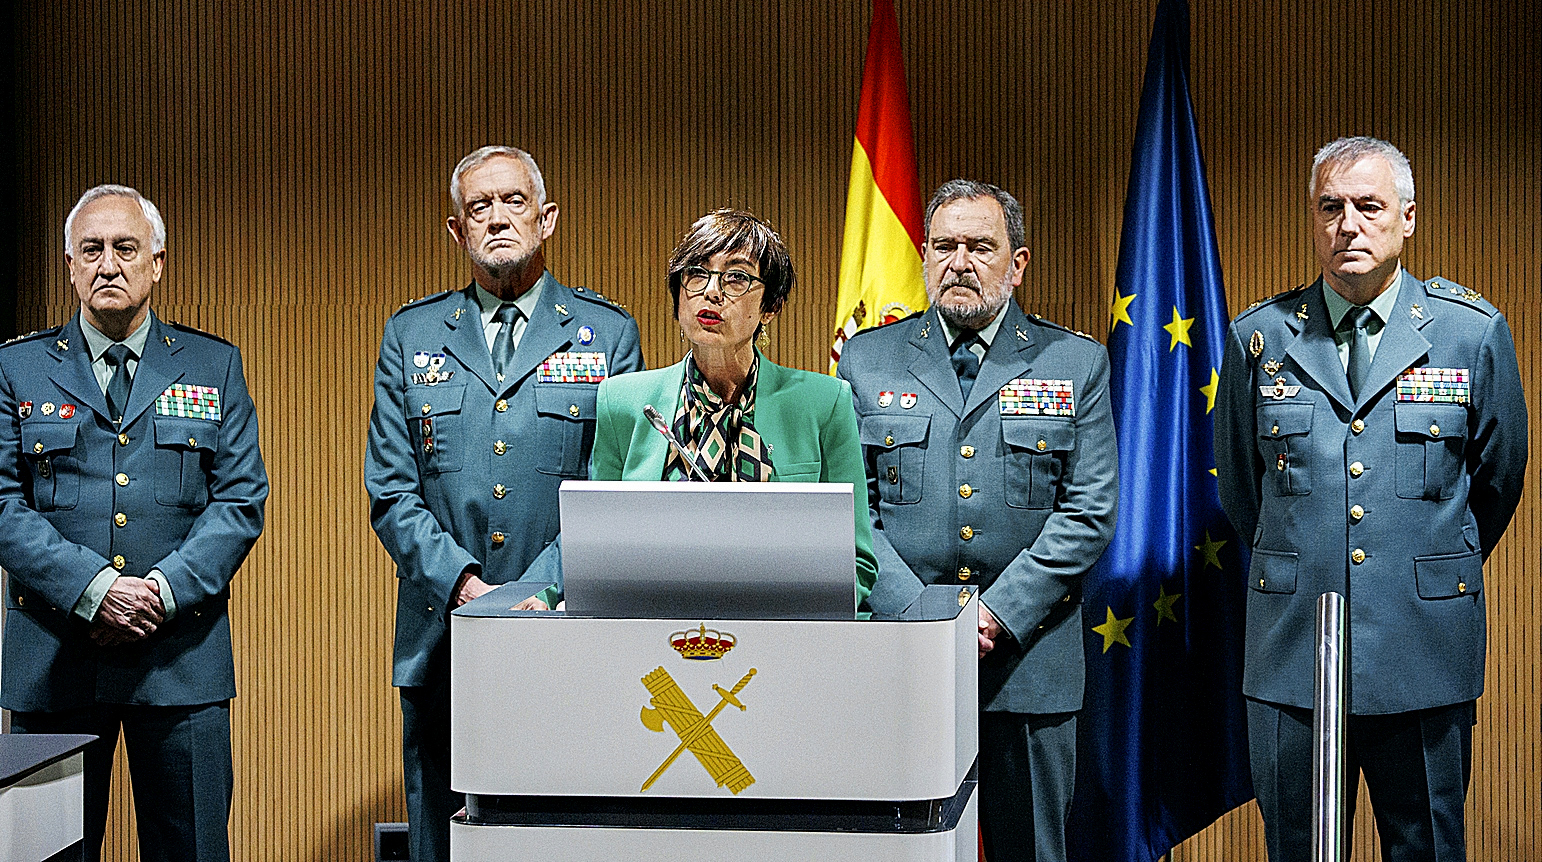 The general director of the Civil Guard, Mar